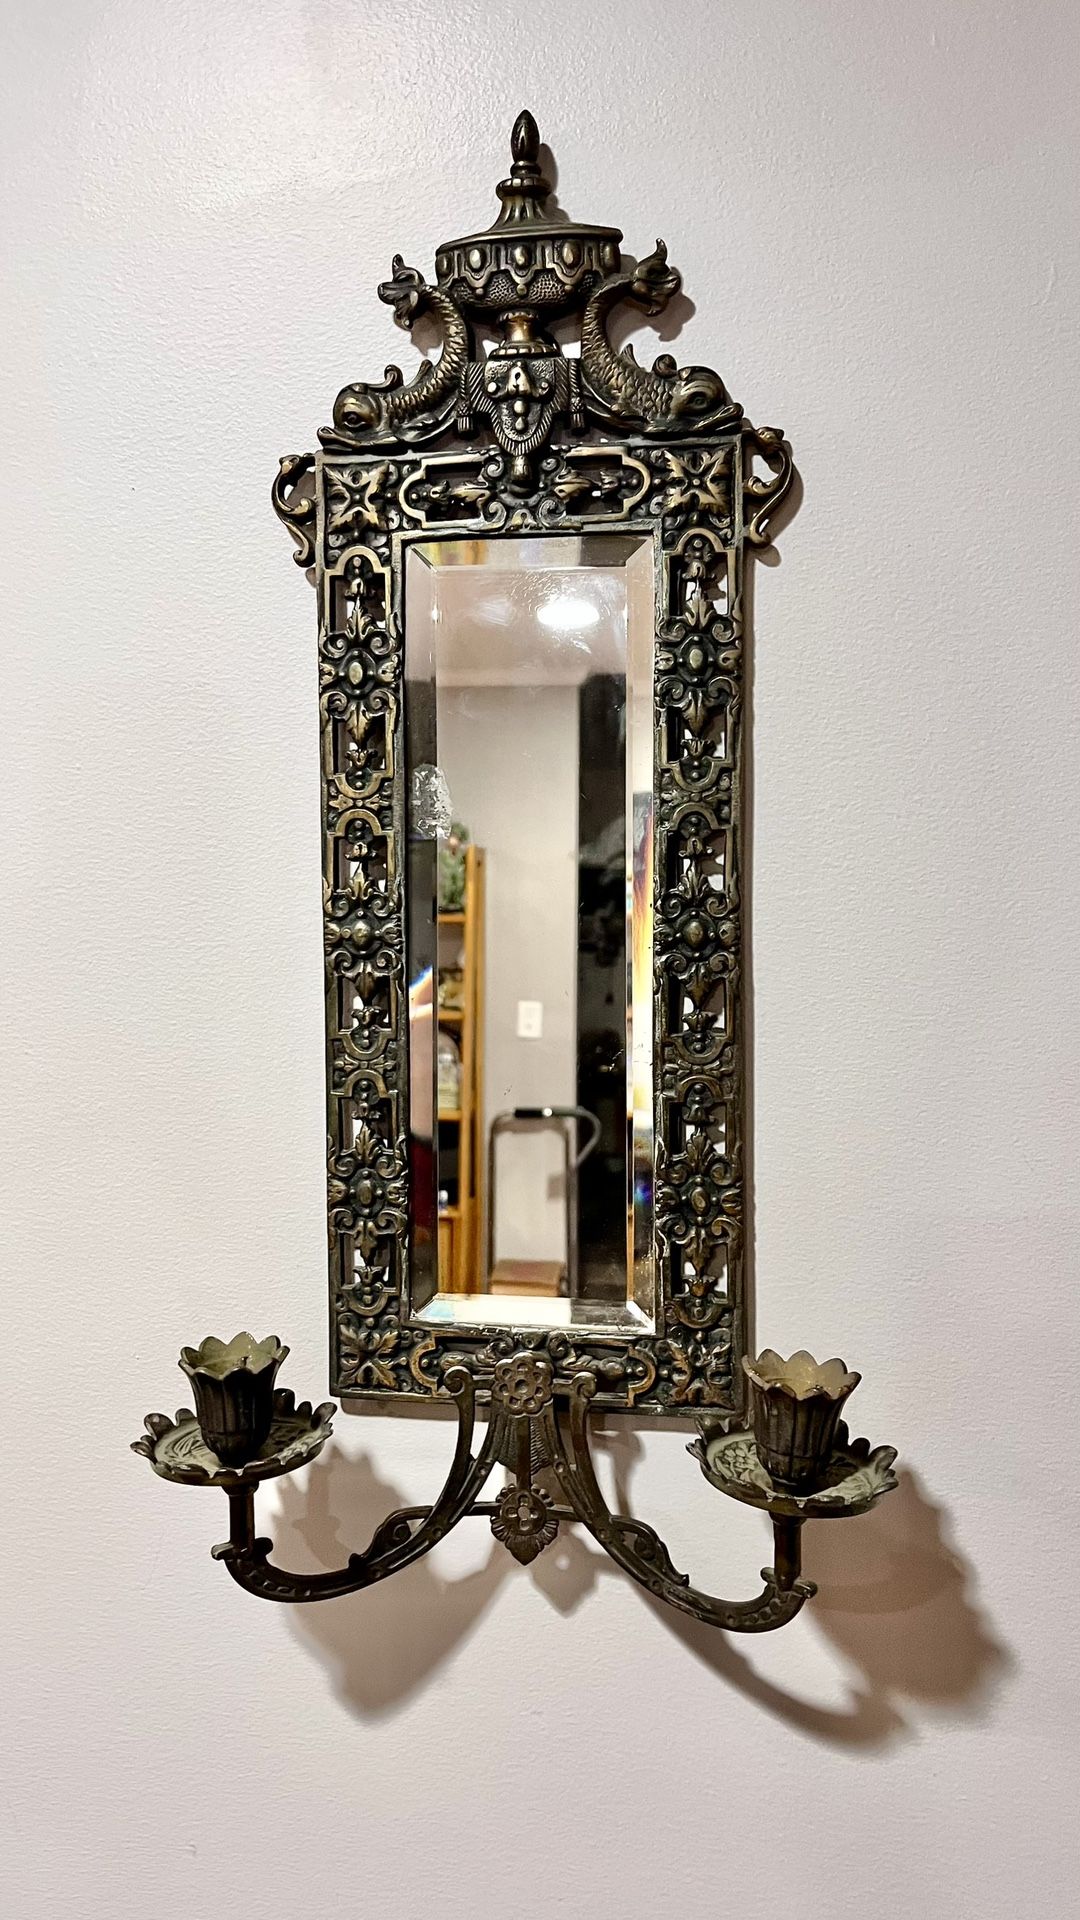 Will Ship ! Antique Victorian Era Brass Framed Mirrored Wall Sconce Adorned by Two Dolphins Koi Victorian Style and Two Candle Holders 18th Century  